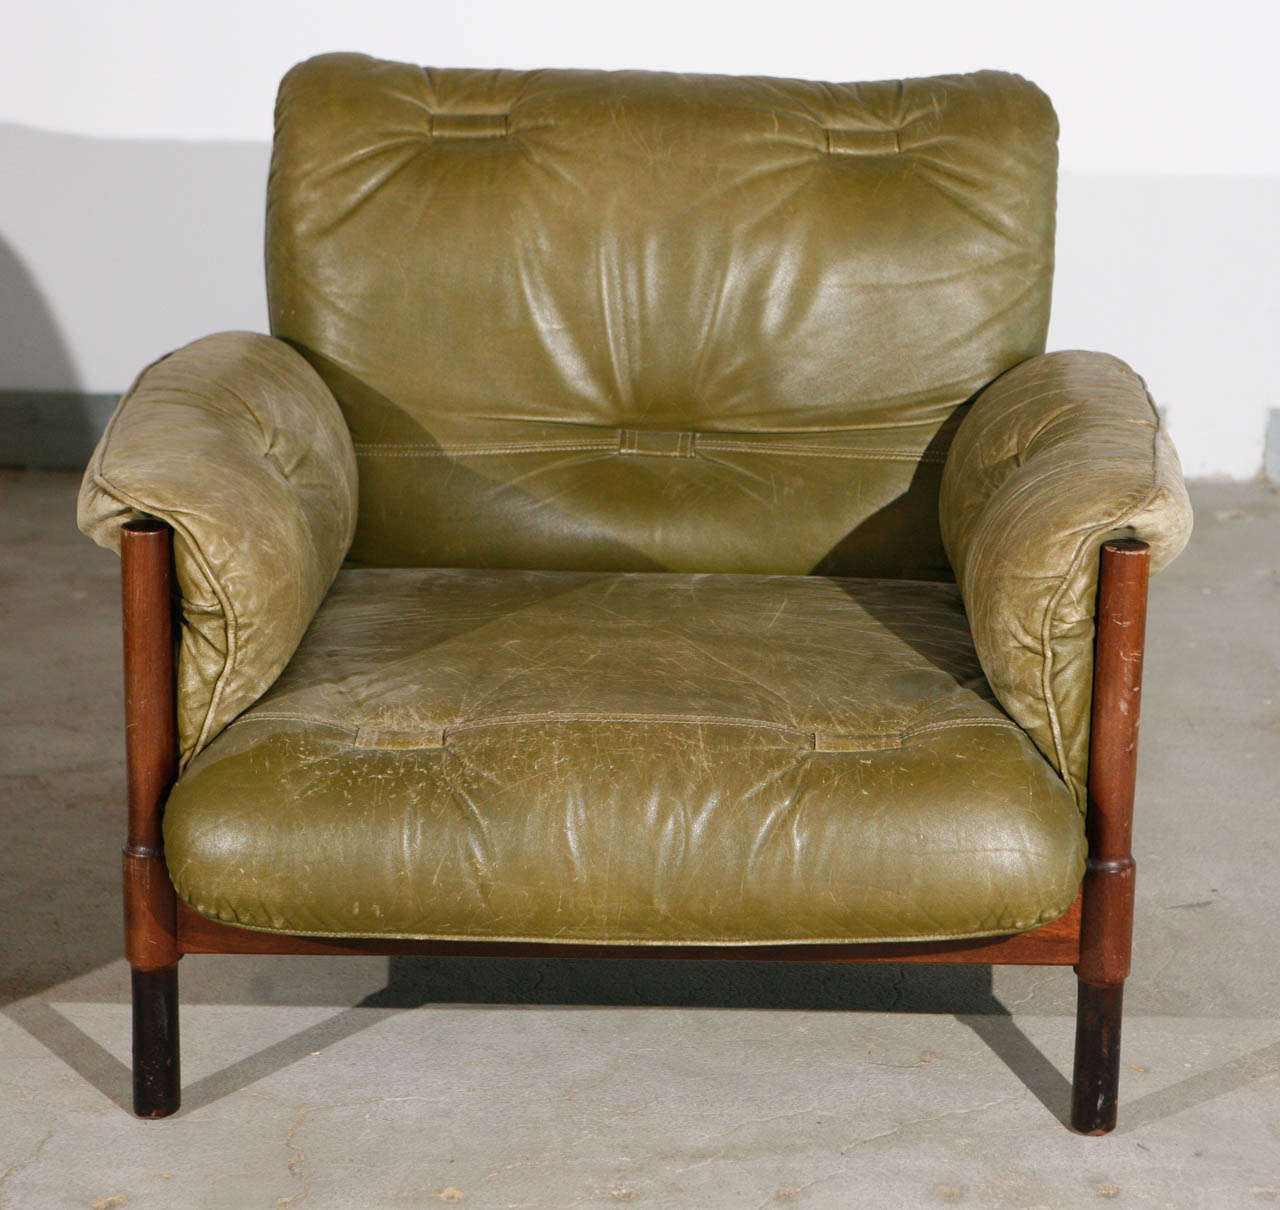 Pair of Brazilian green leather and wood armchairs with green leather strapping and quilting.